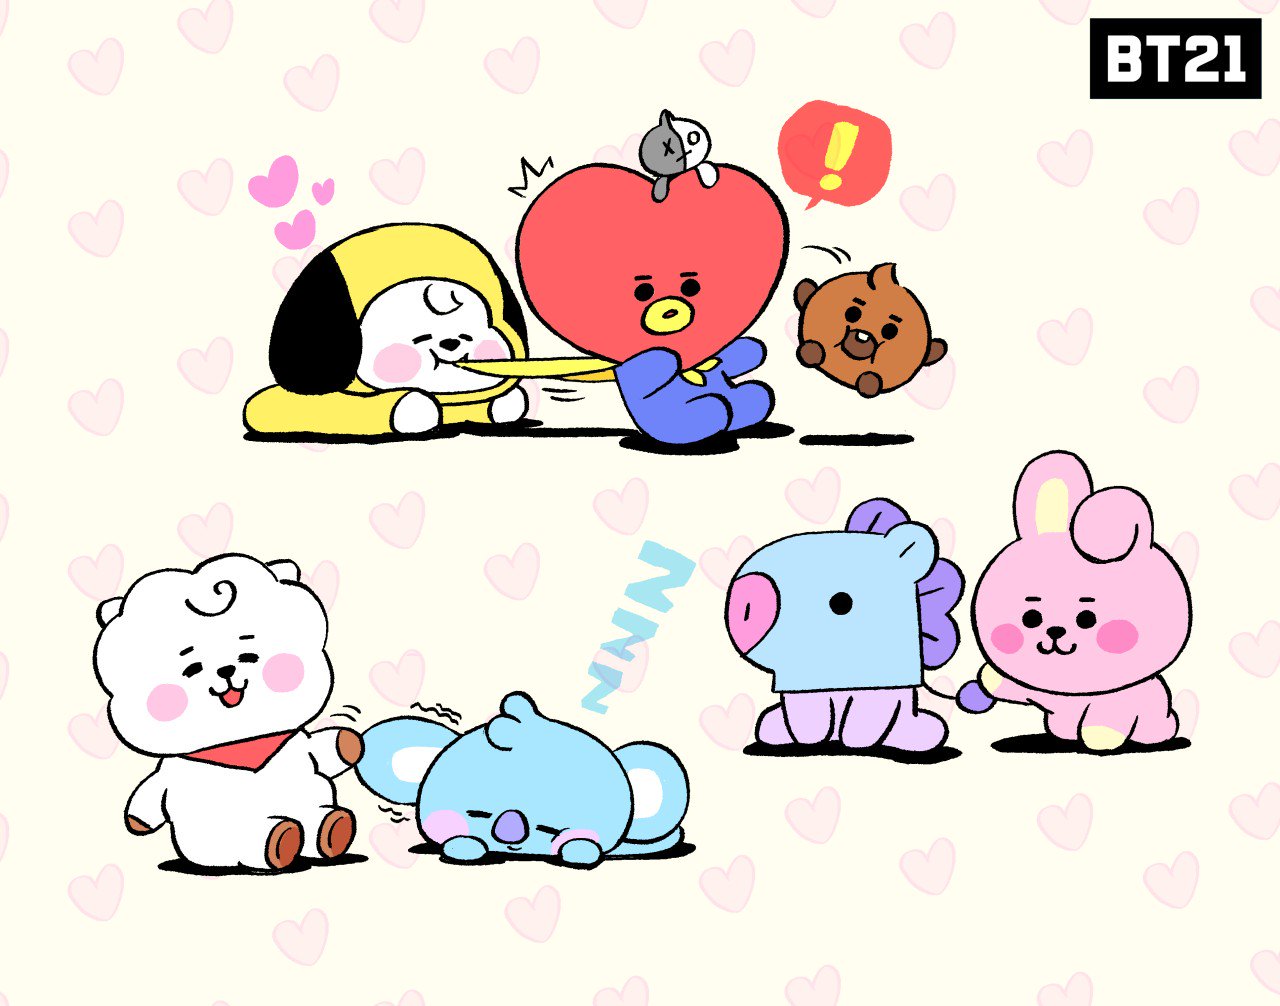 Bt21 Japan Official たまらない可愛さ きゅるるん Baby Bt21 T Co V7x5hhyocw Twitter